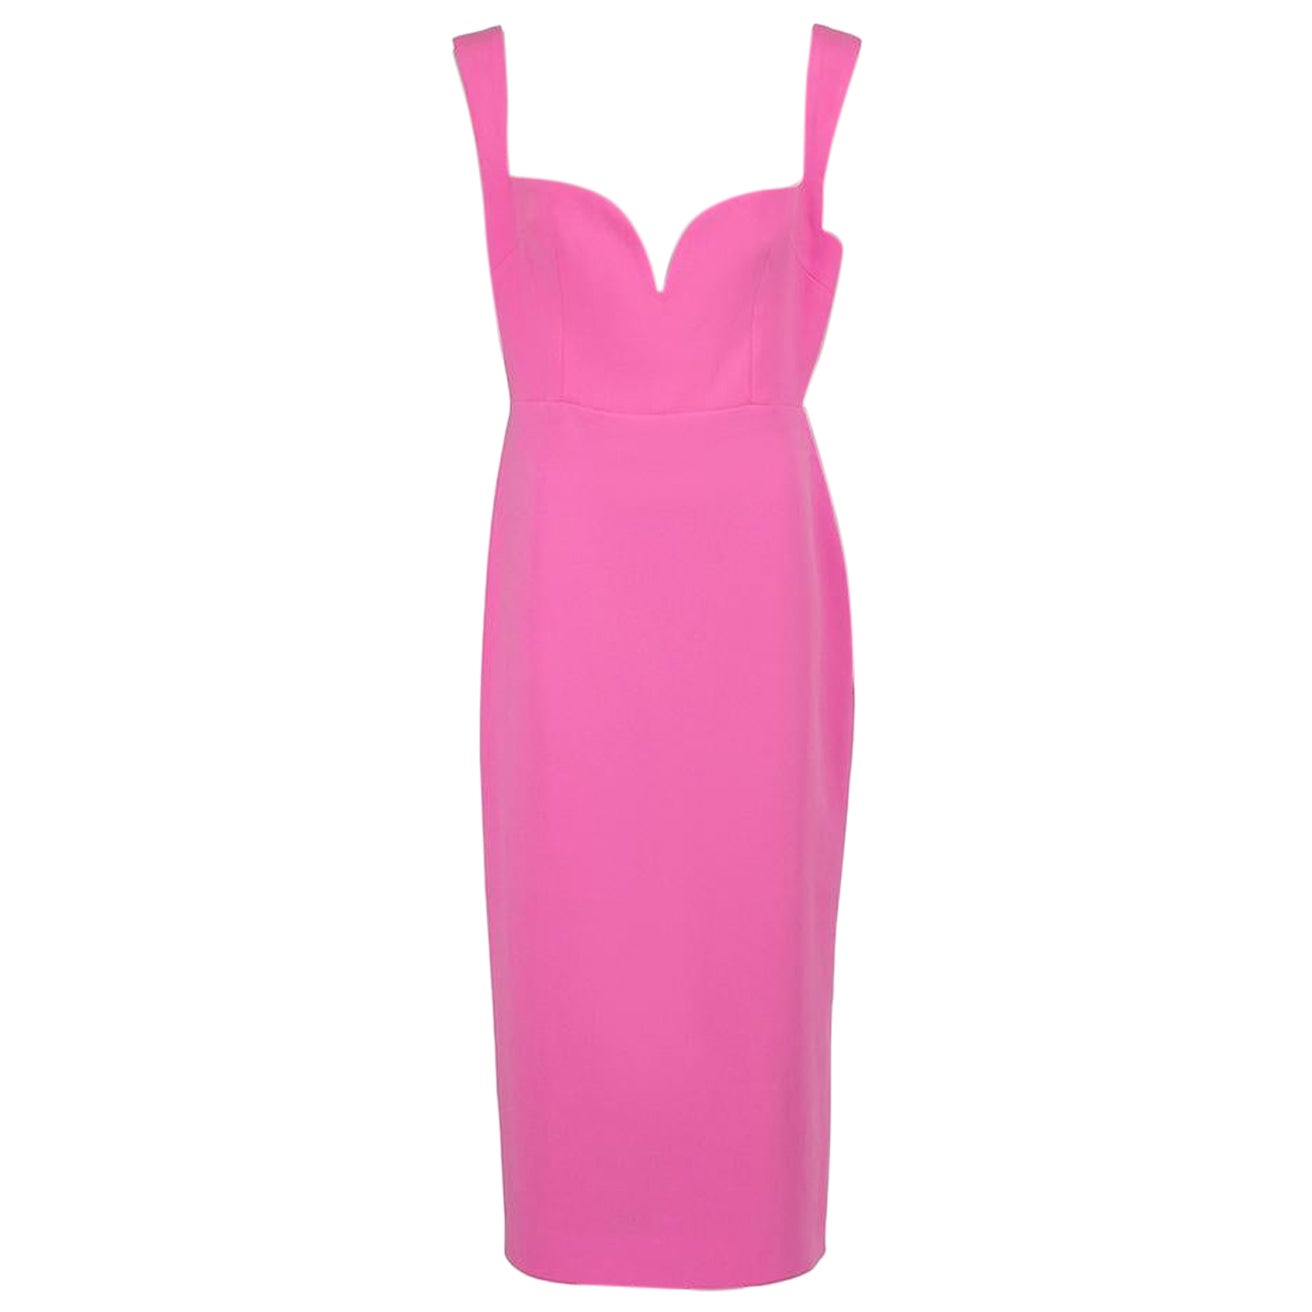 Alex Perry Pink Sweetheart Neck Midi Dress Size XL For Sale